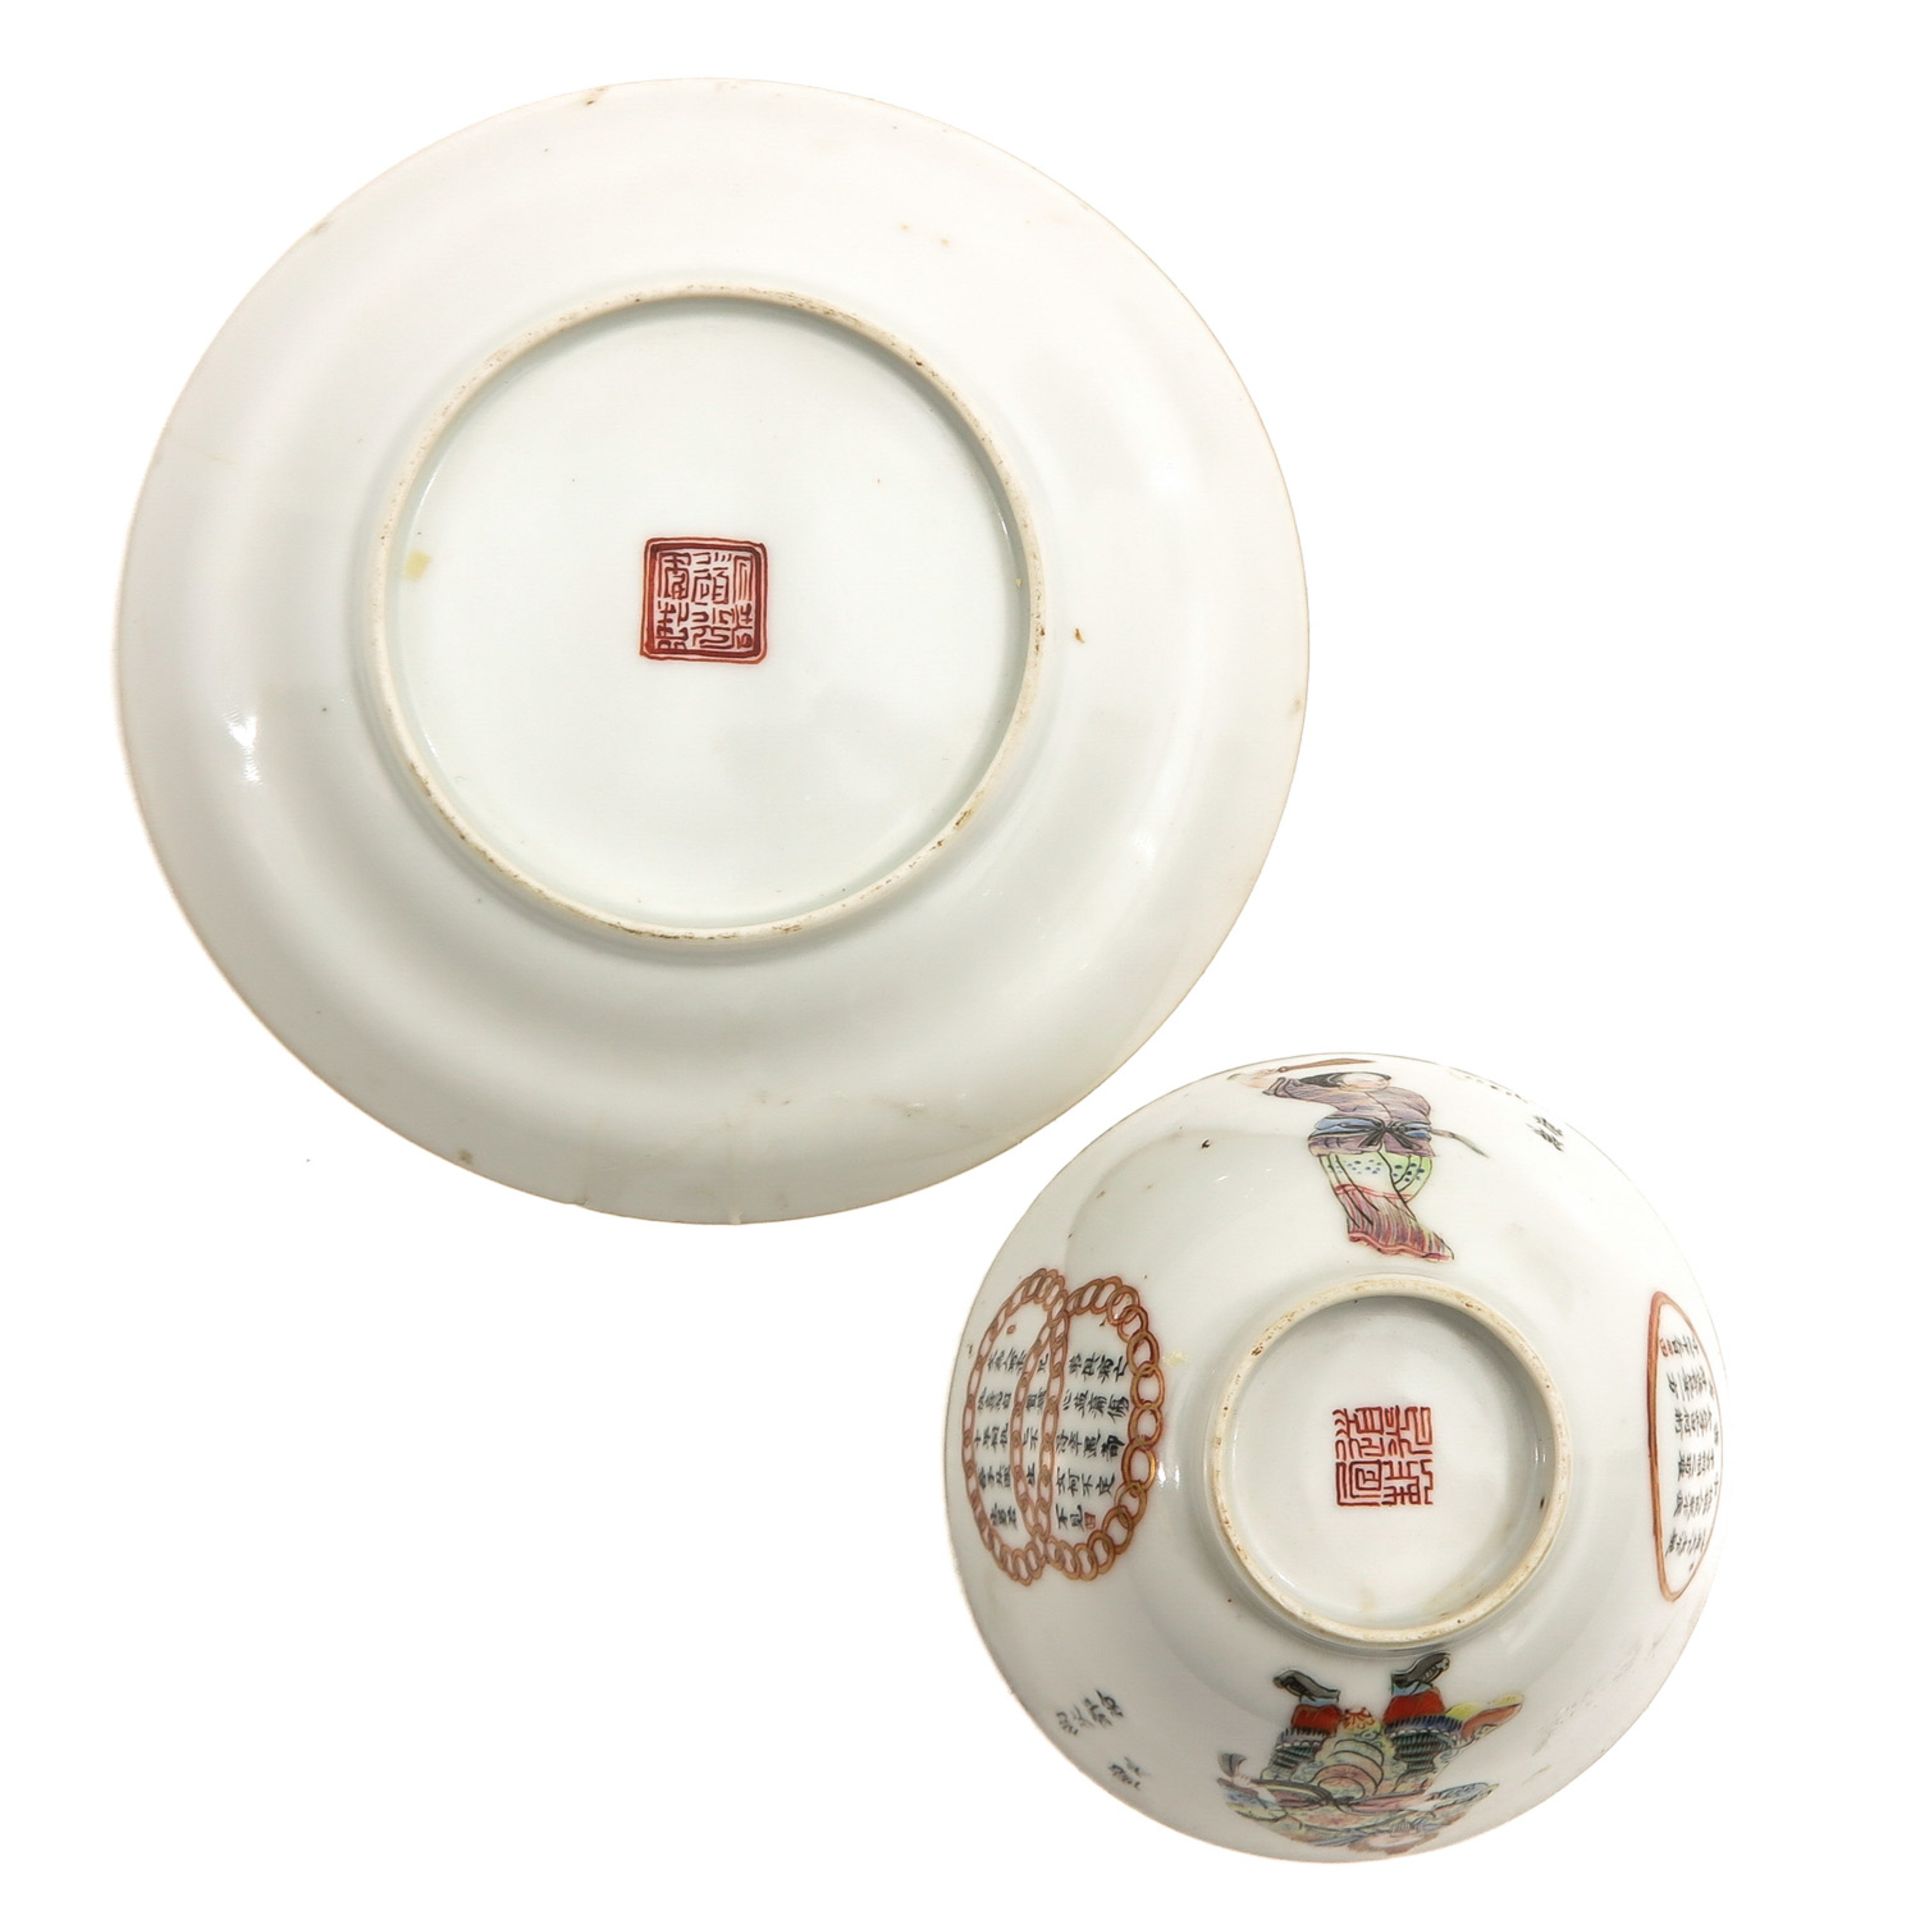 A Wu Shuang Pu Decor Cup and Saucer - Image 6 of 9